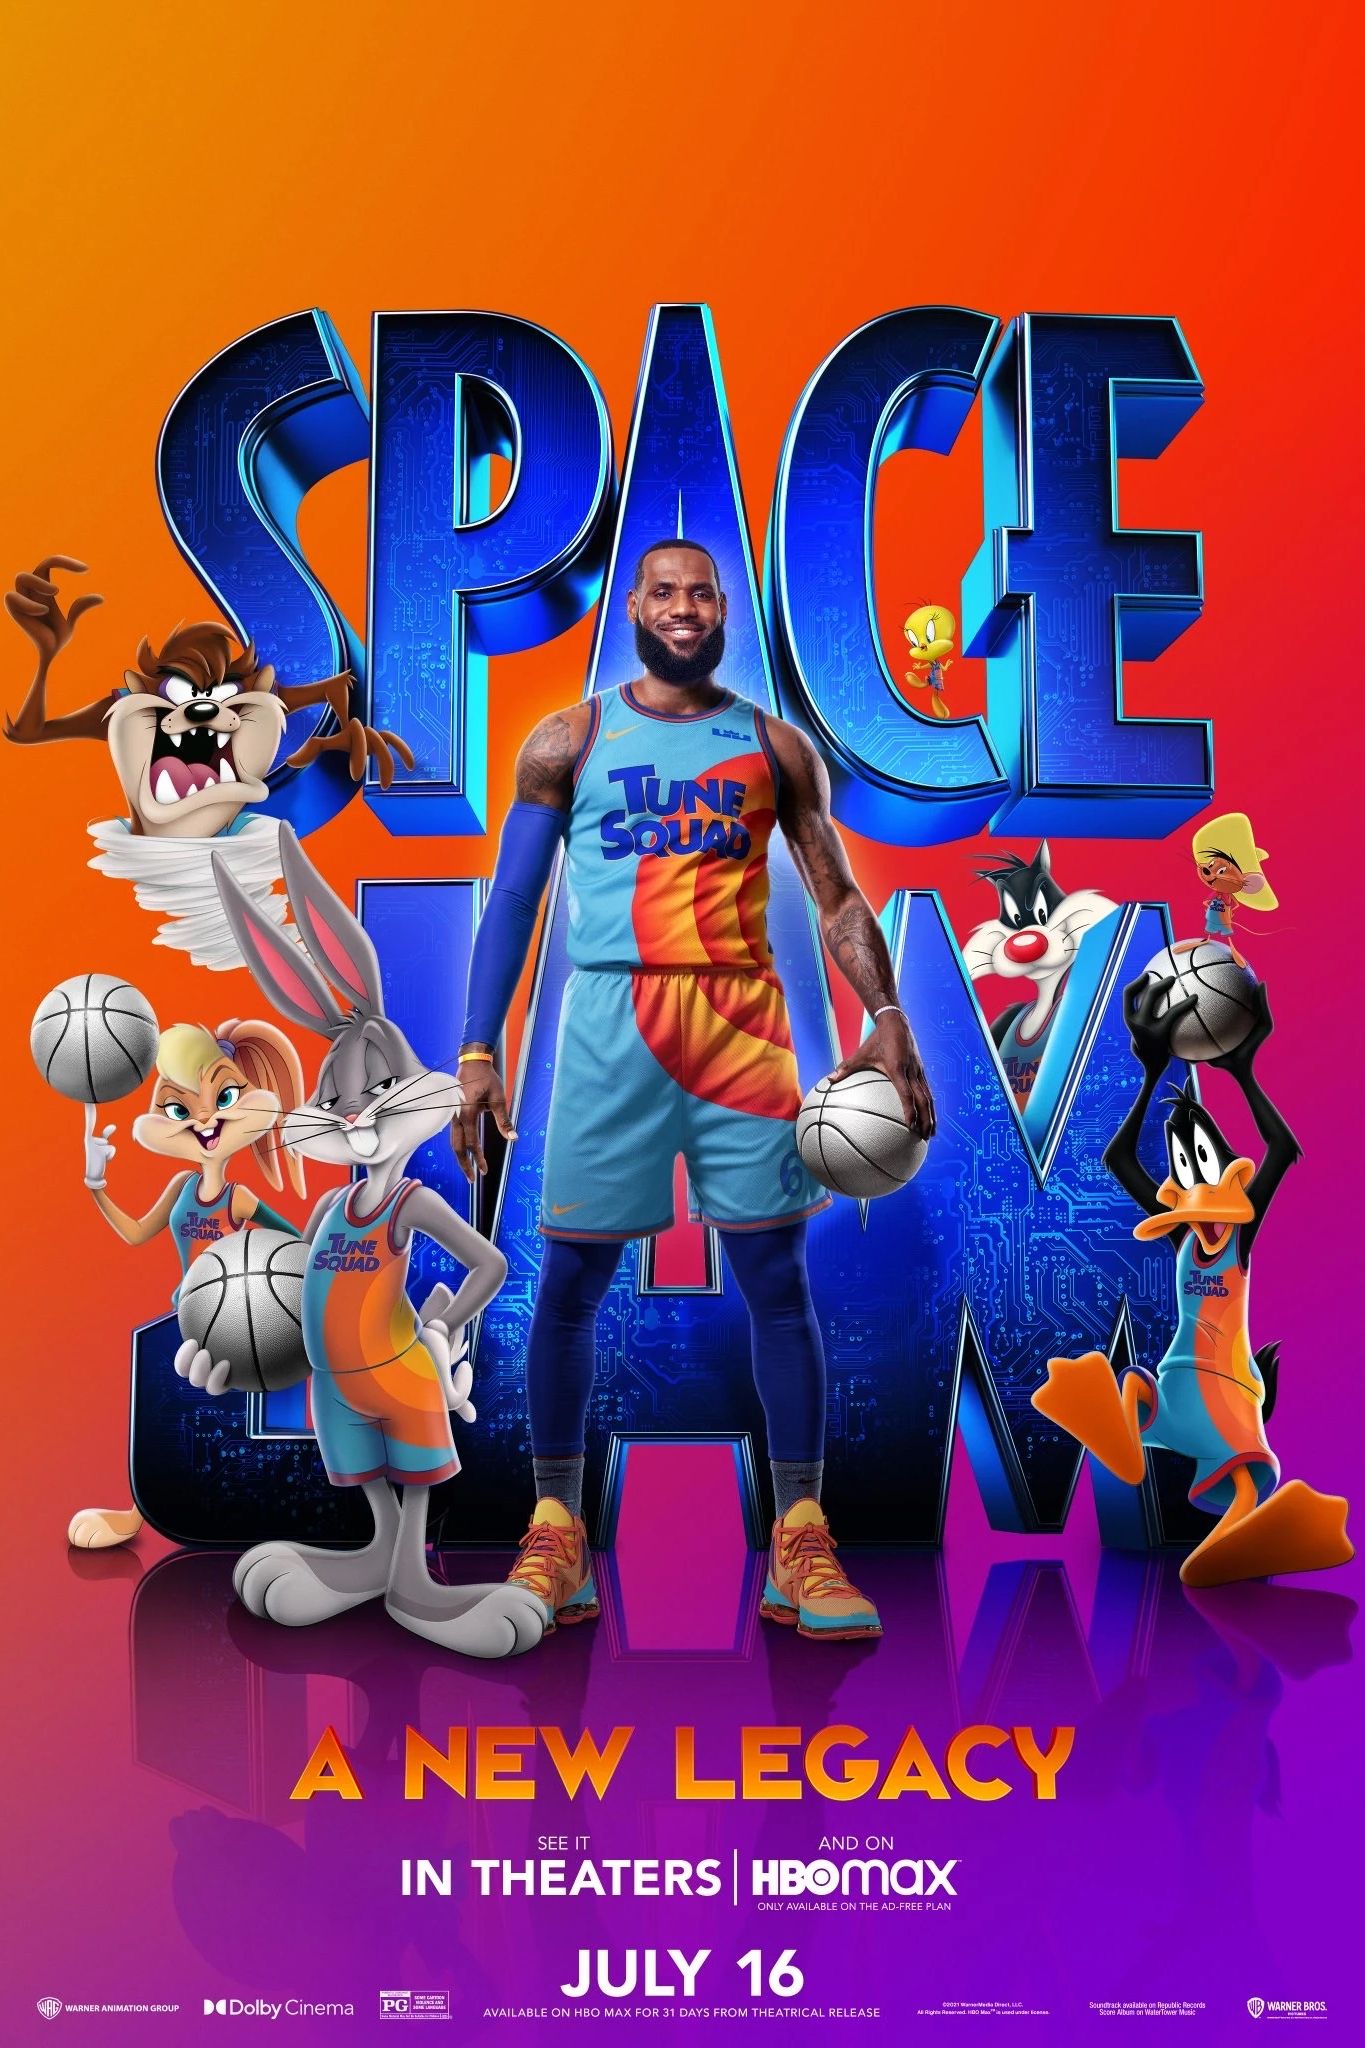 Space Jam 2 Trailer Reveals CGI Versions Of The Whole Toon Squad